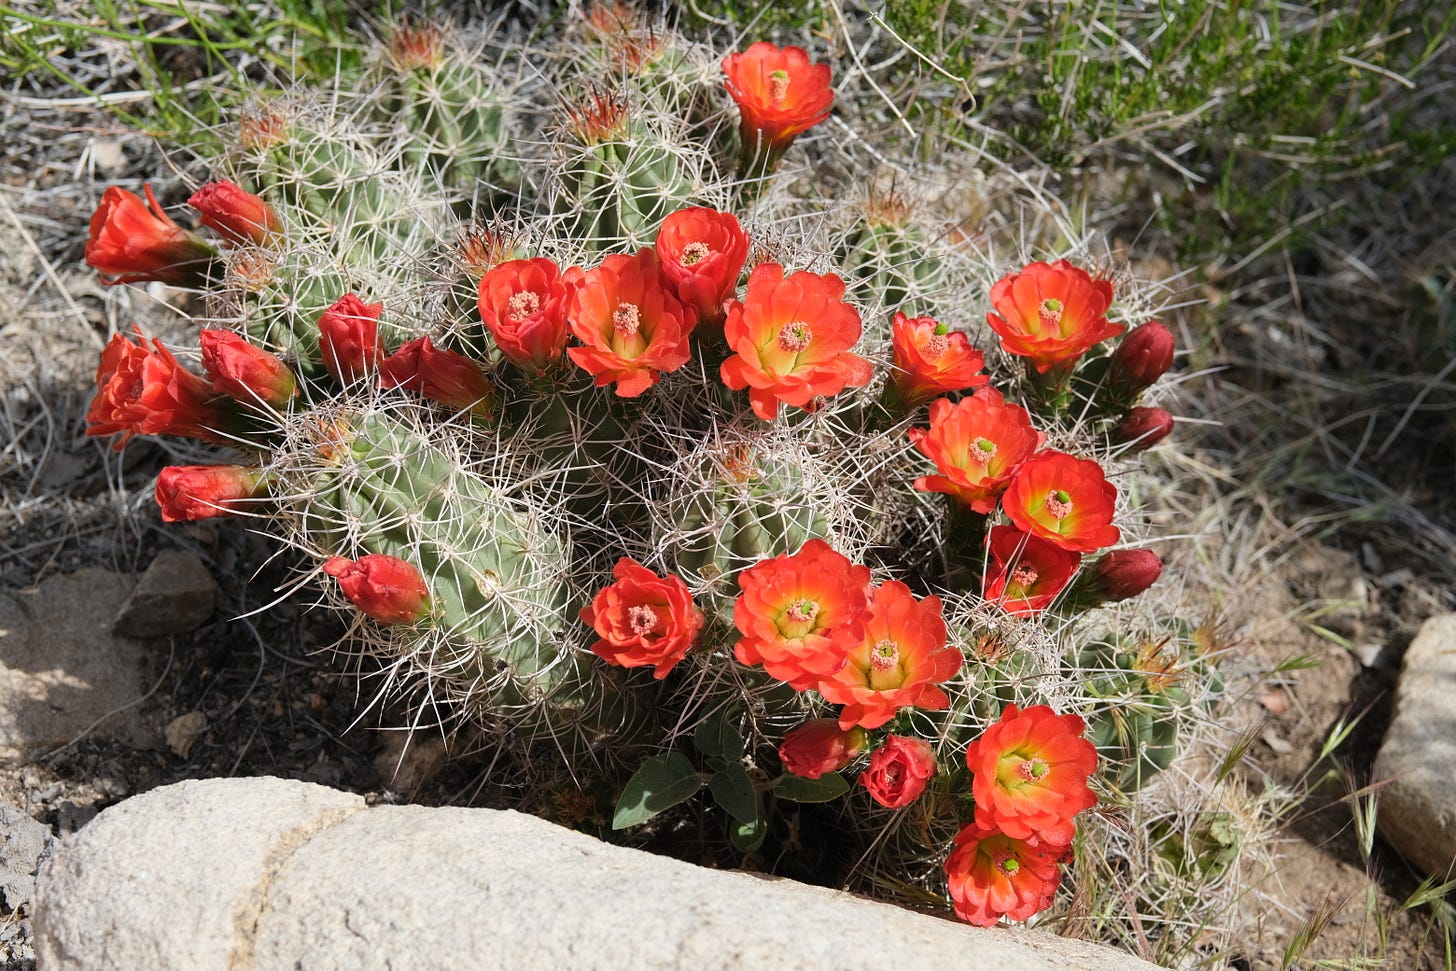 Red and yellow flowers bloom from a green cactus covered in long, sharp spines.